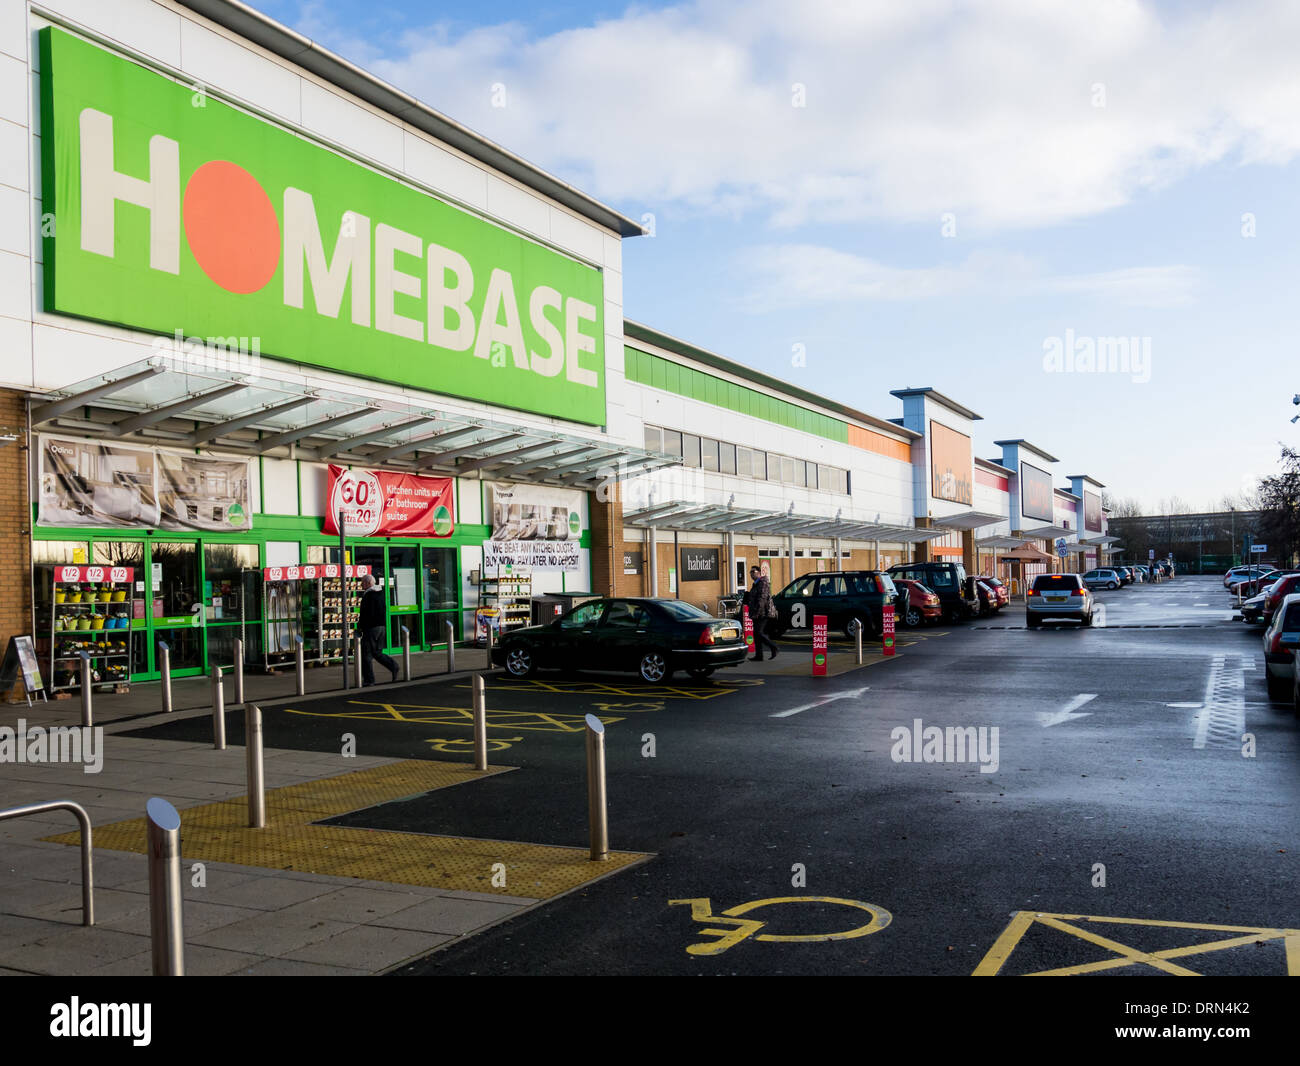 Homebase DIY and Hardware Store in a suburban retail park Stock Photo